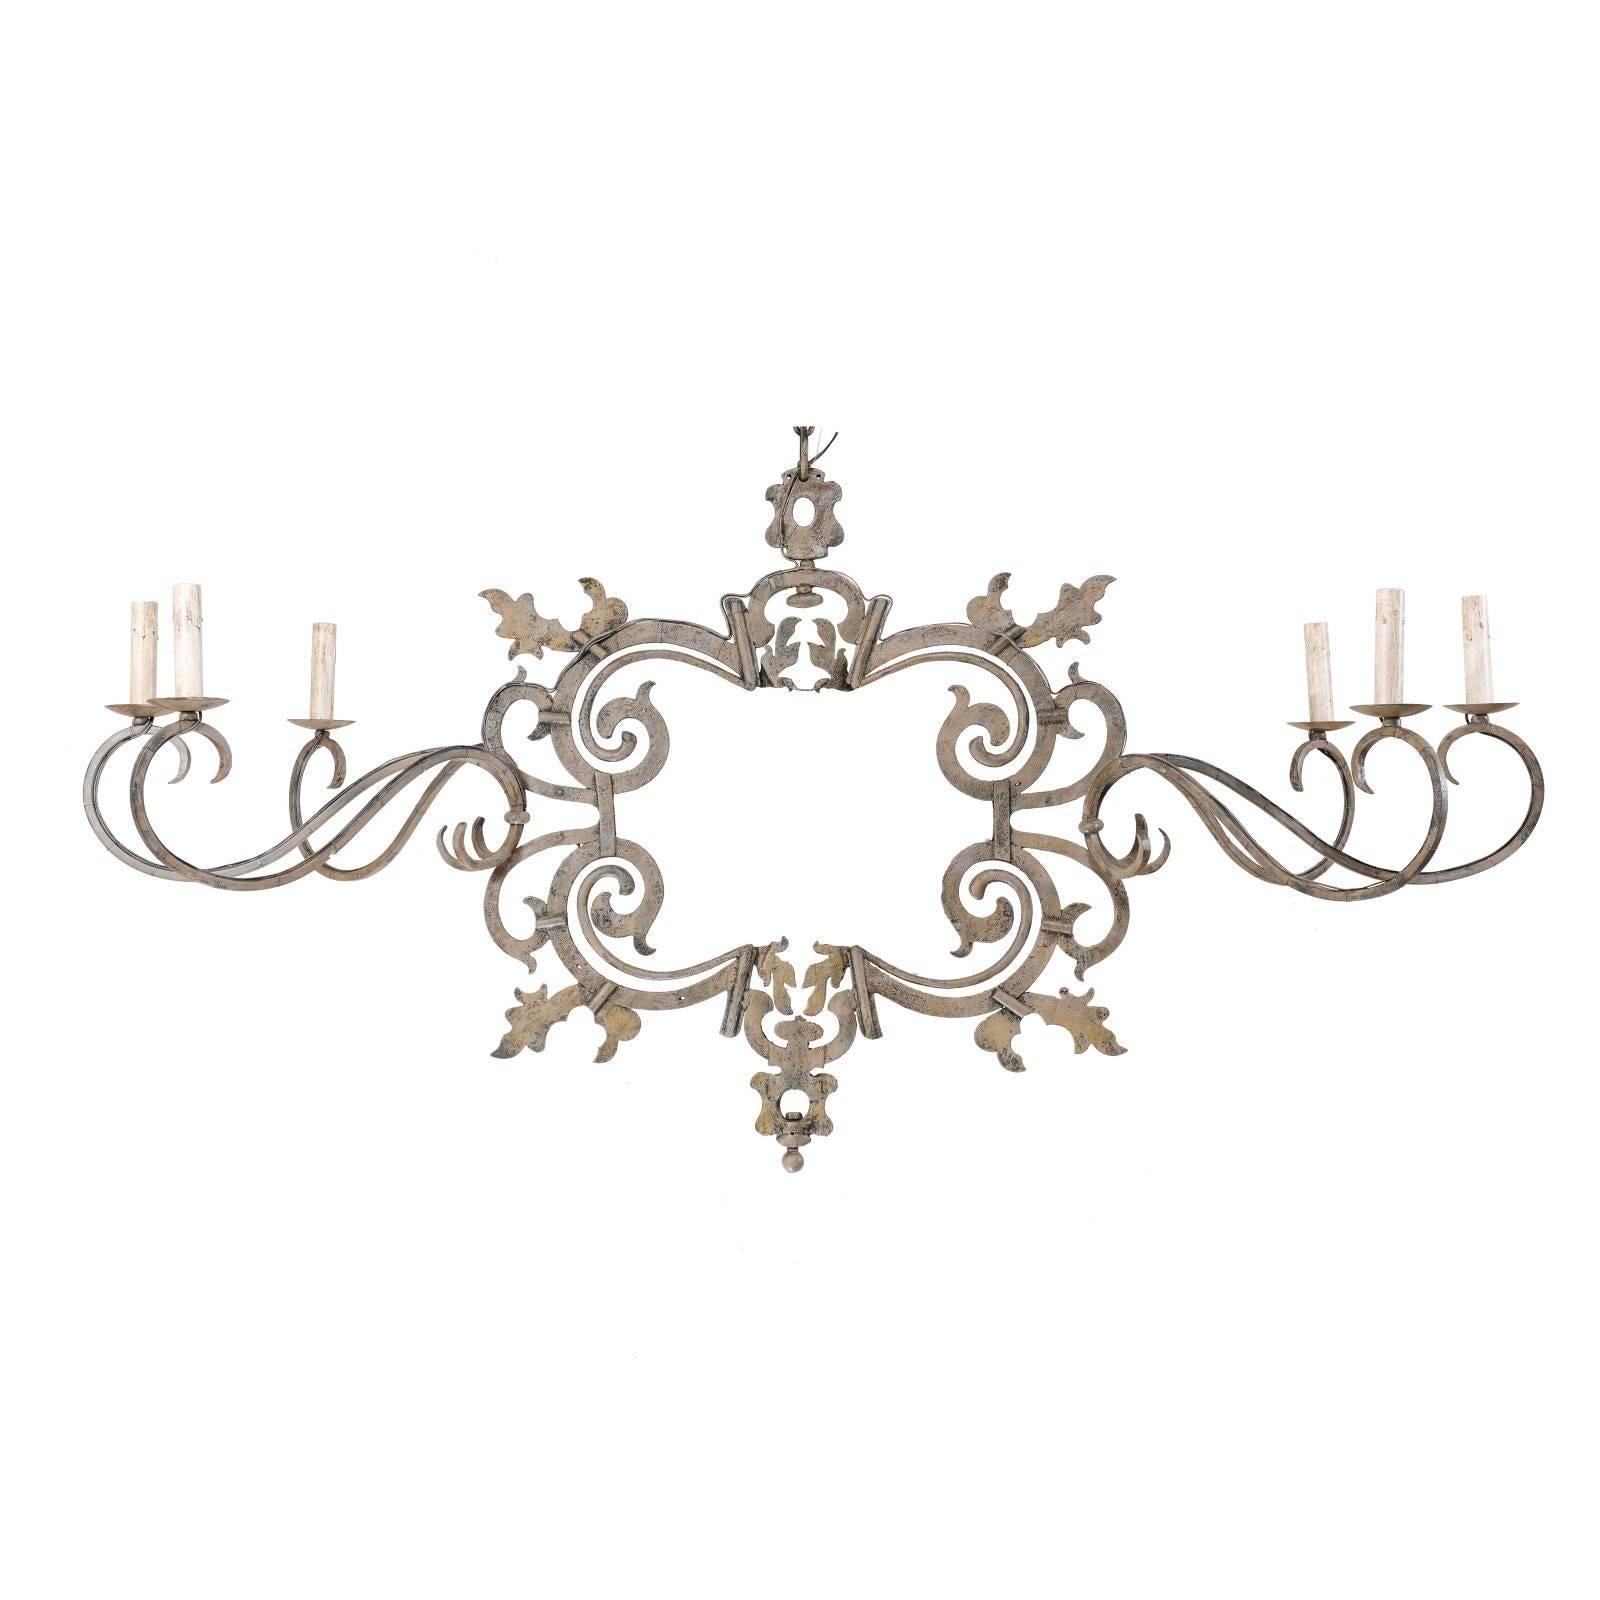 Large Italian Painted Iron Chandelier with 18th Century Scrolling Iron Work